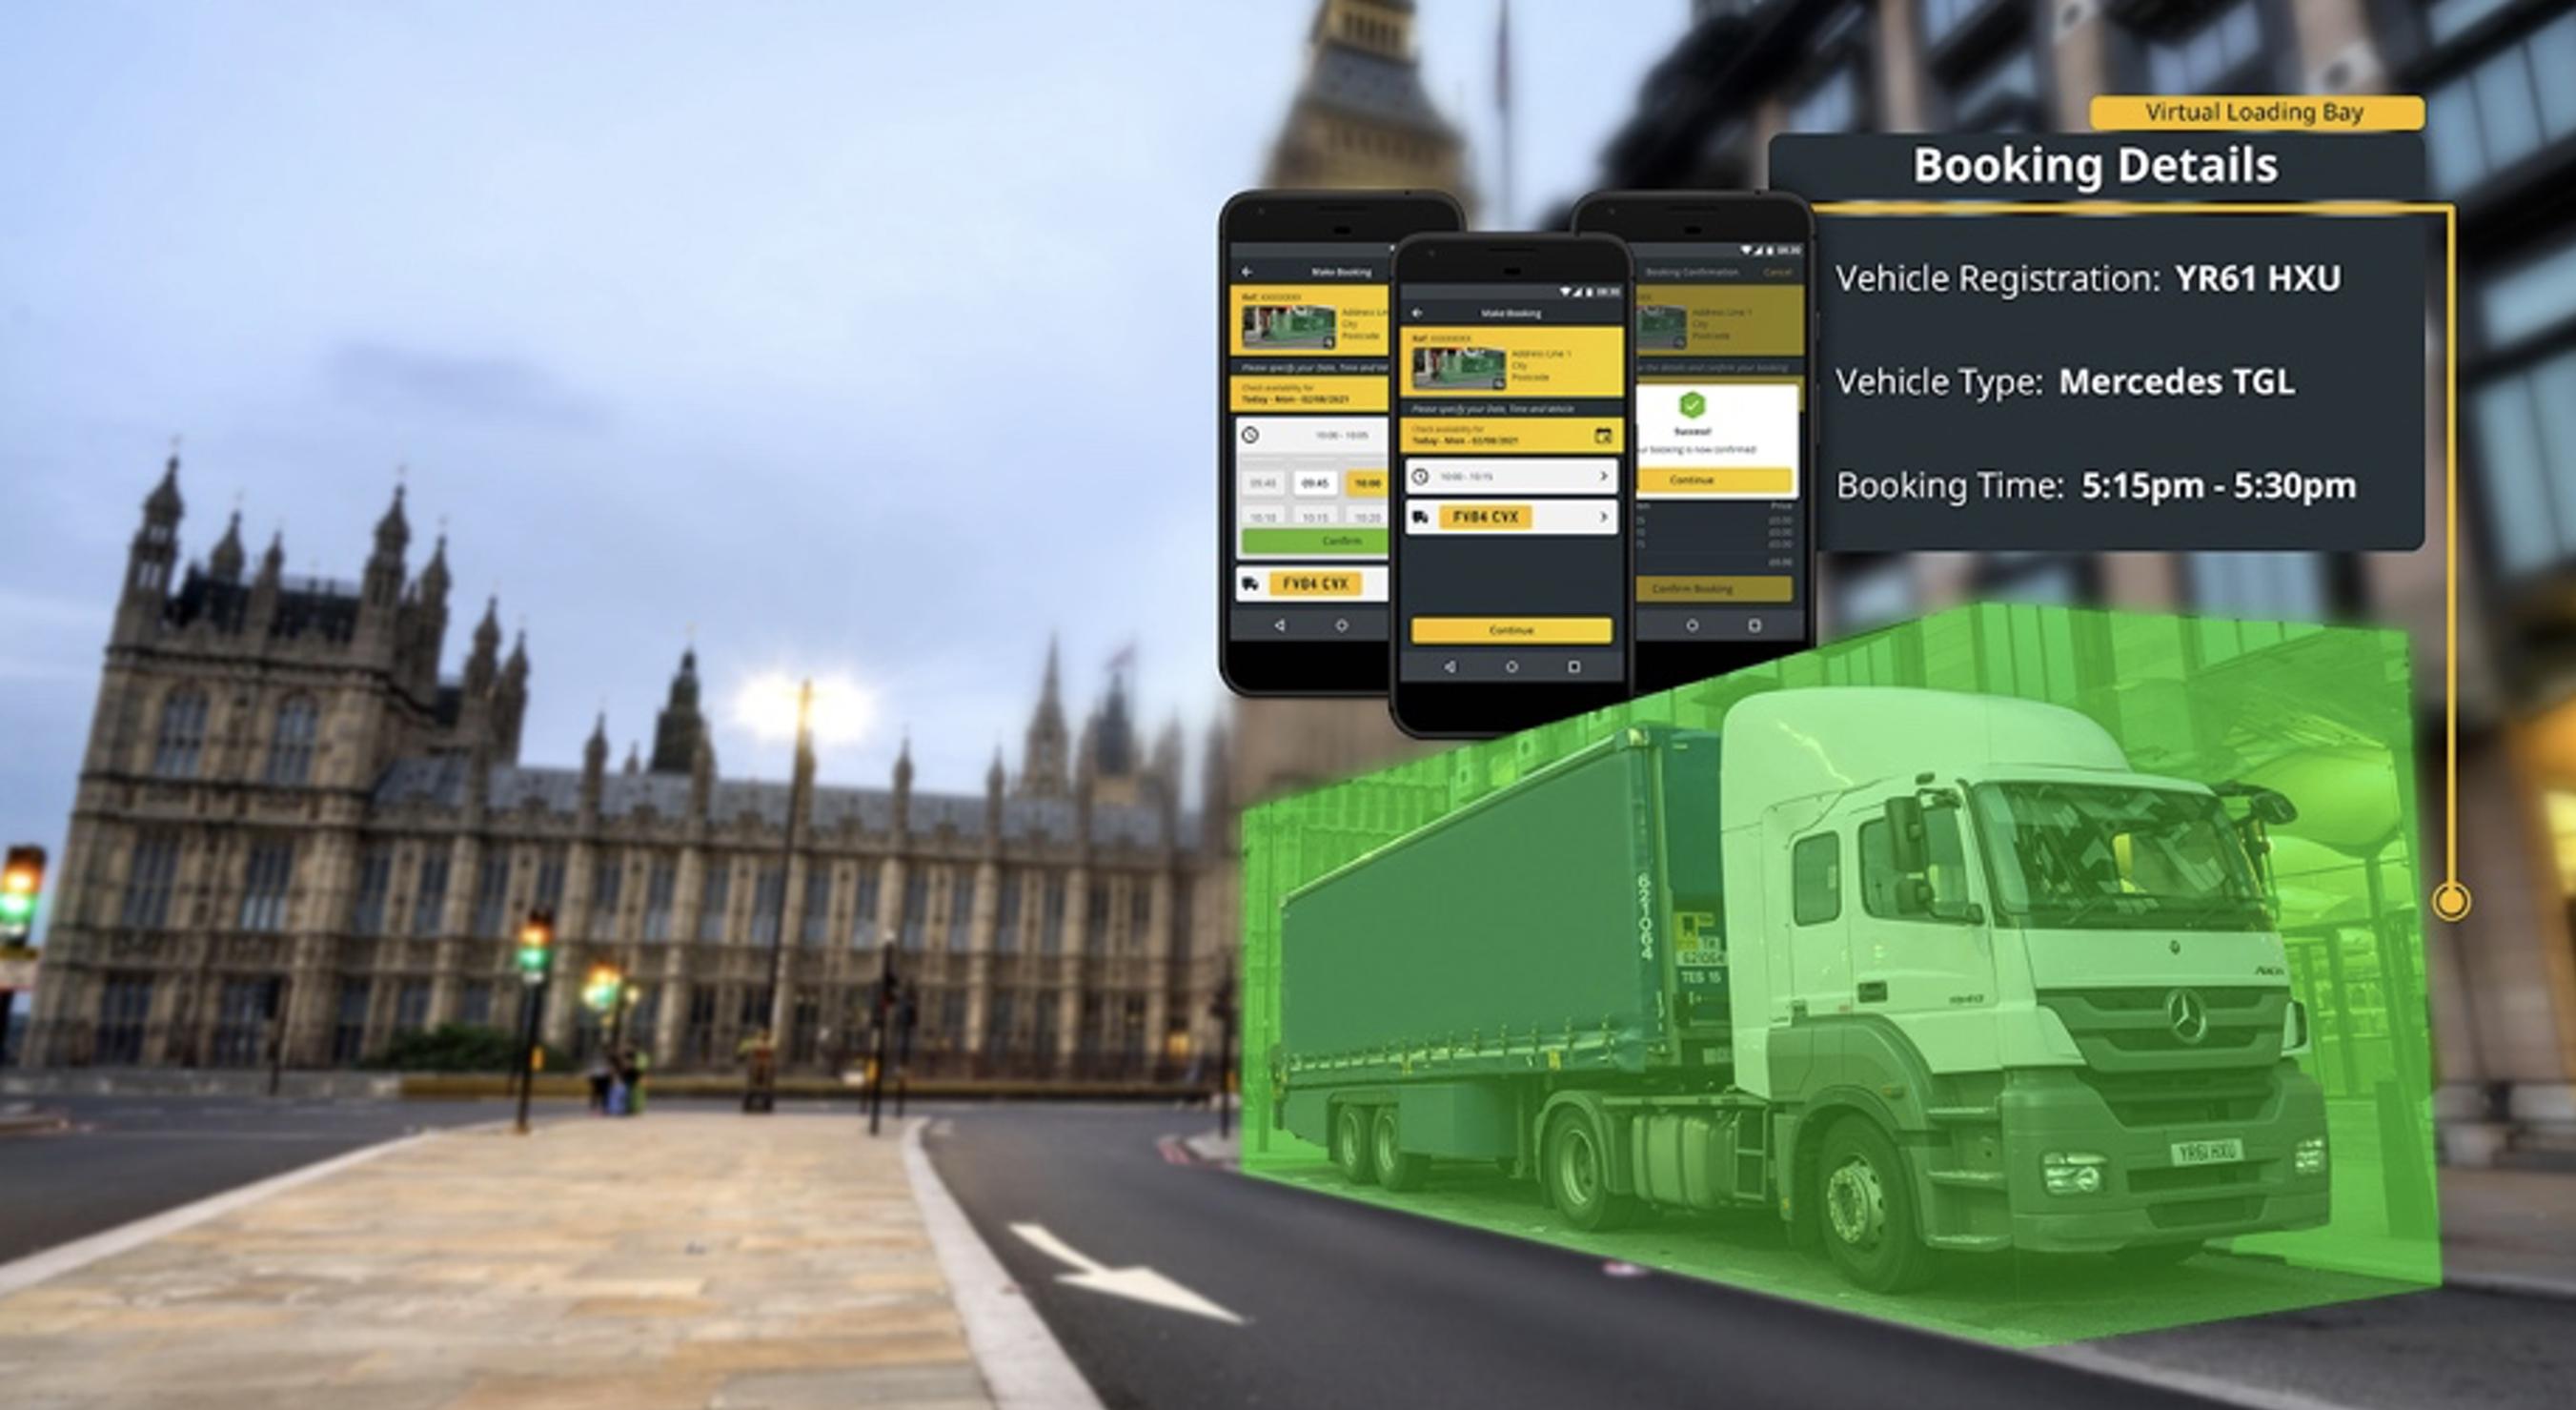 Grid Smarter Cities` Kerb system allows deliveries to be booked into virtual kerbside timeslots